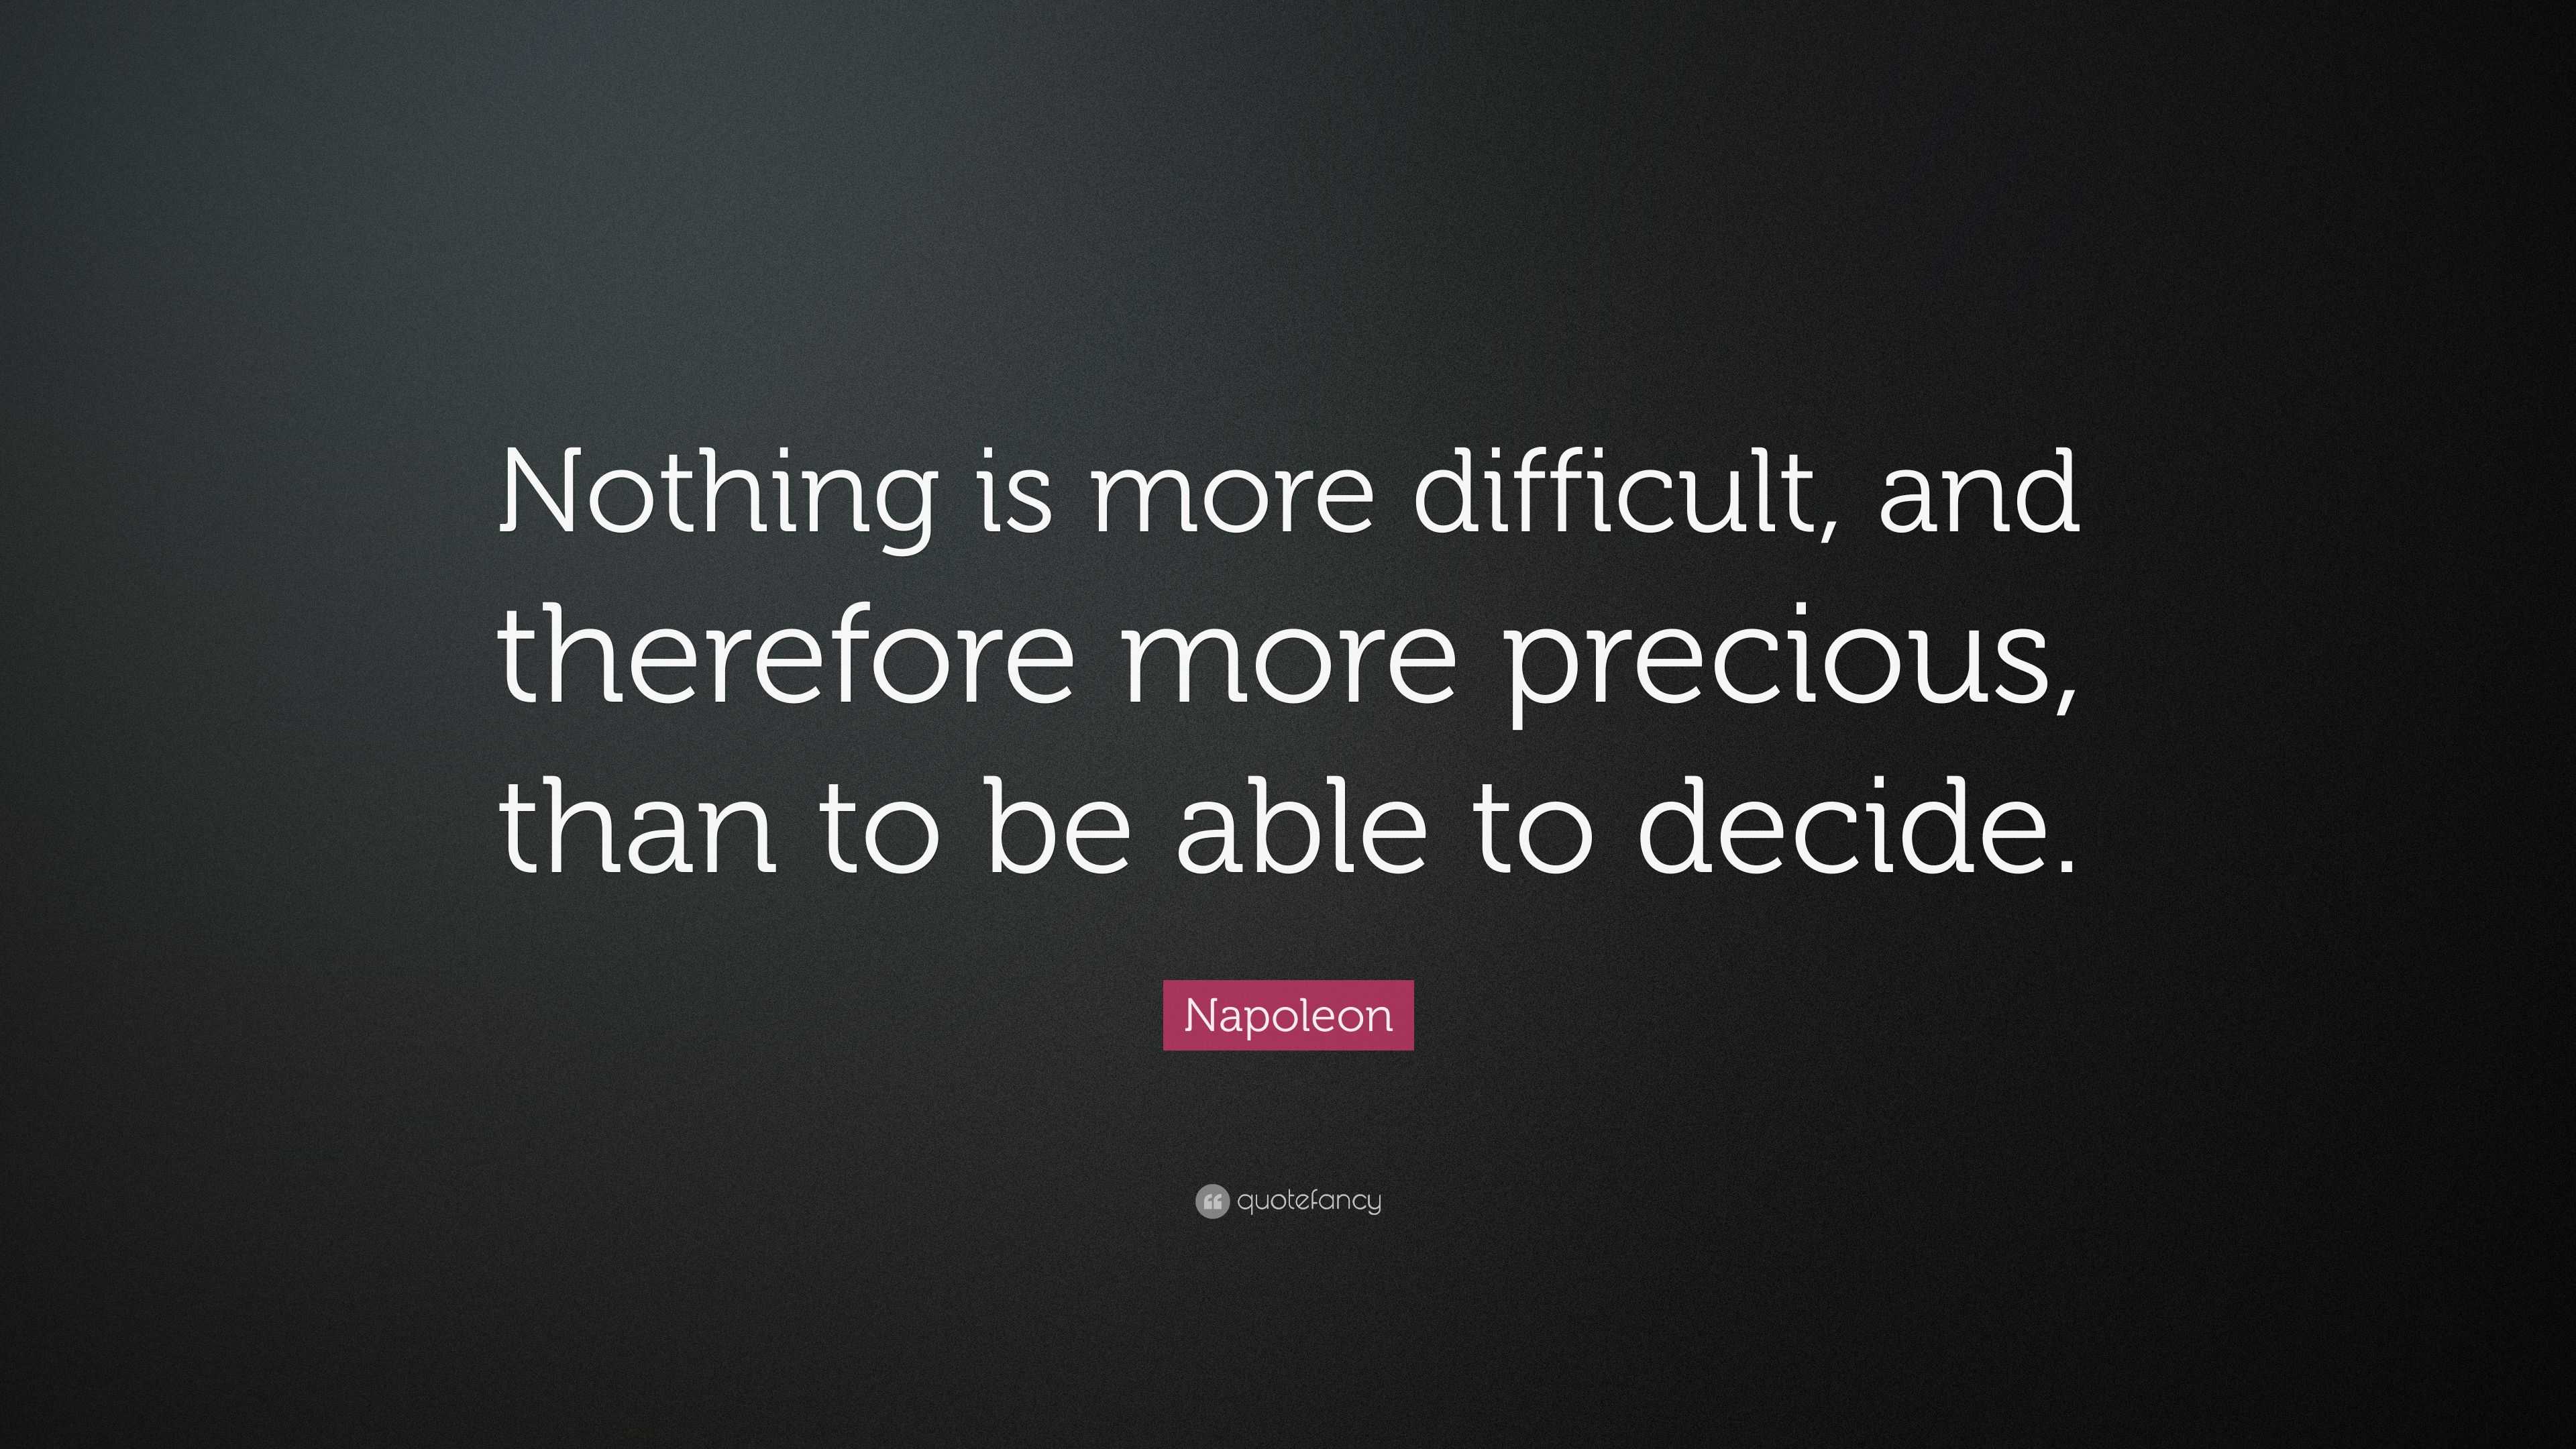 Napoleon Quote: “Nothing is more difficult, and therefore more precious ...